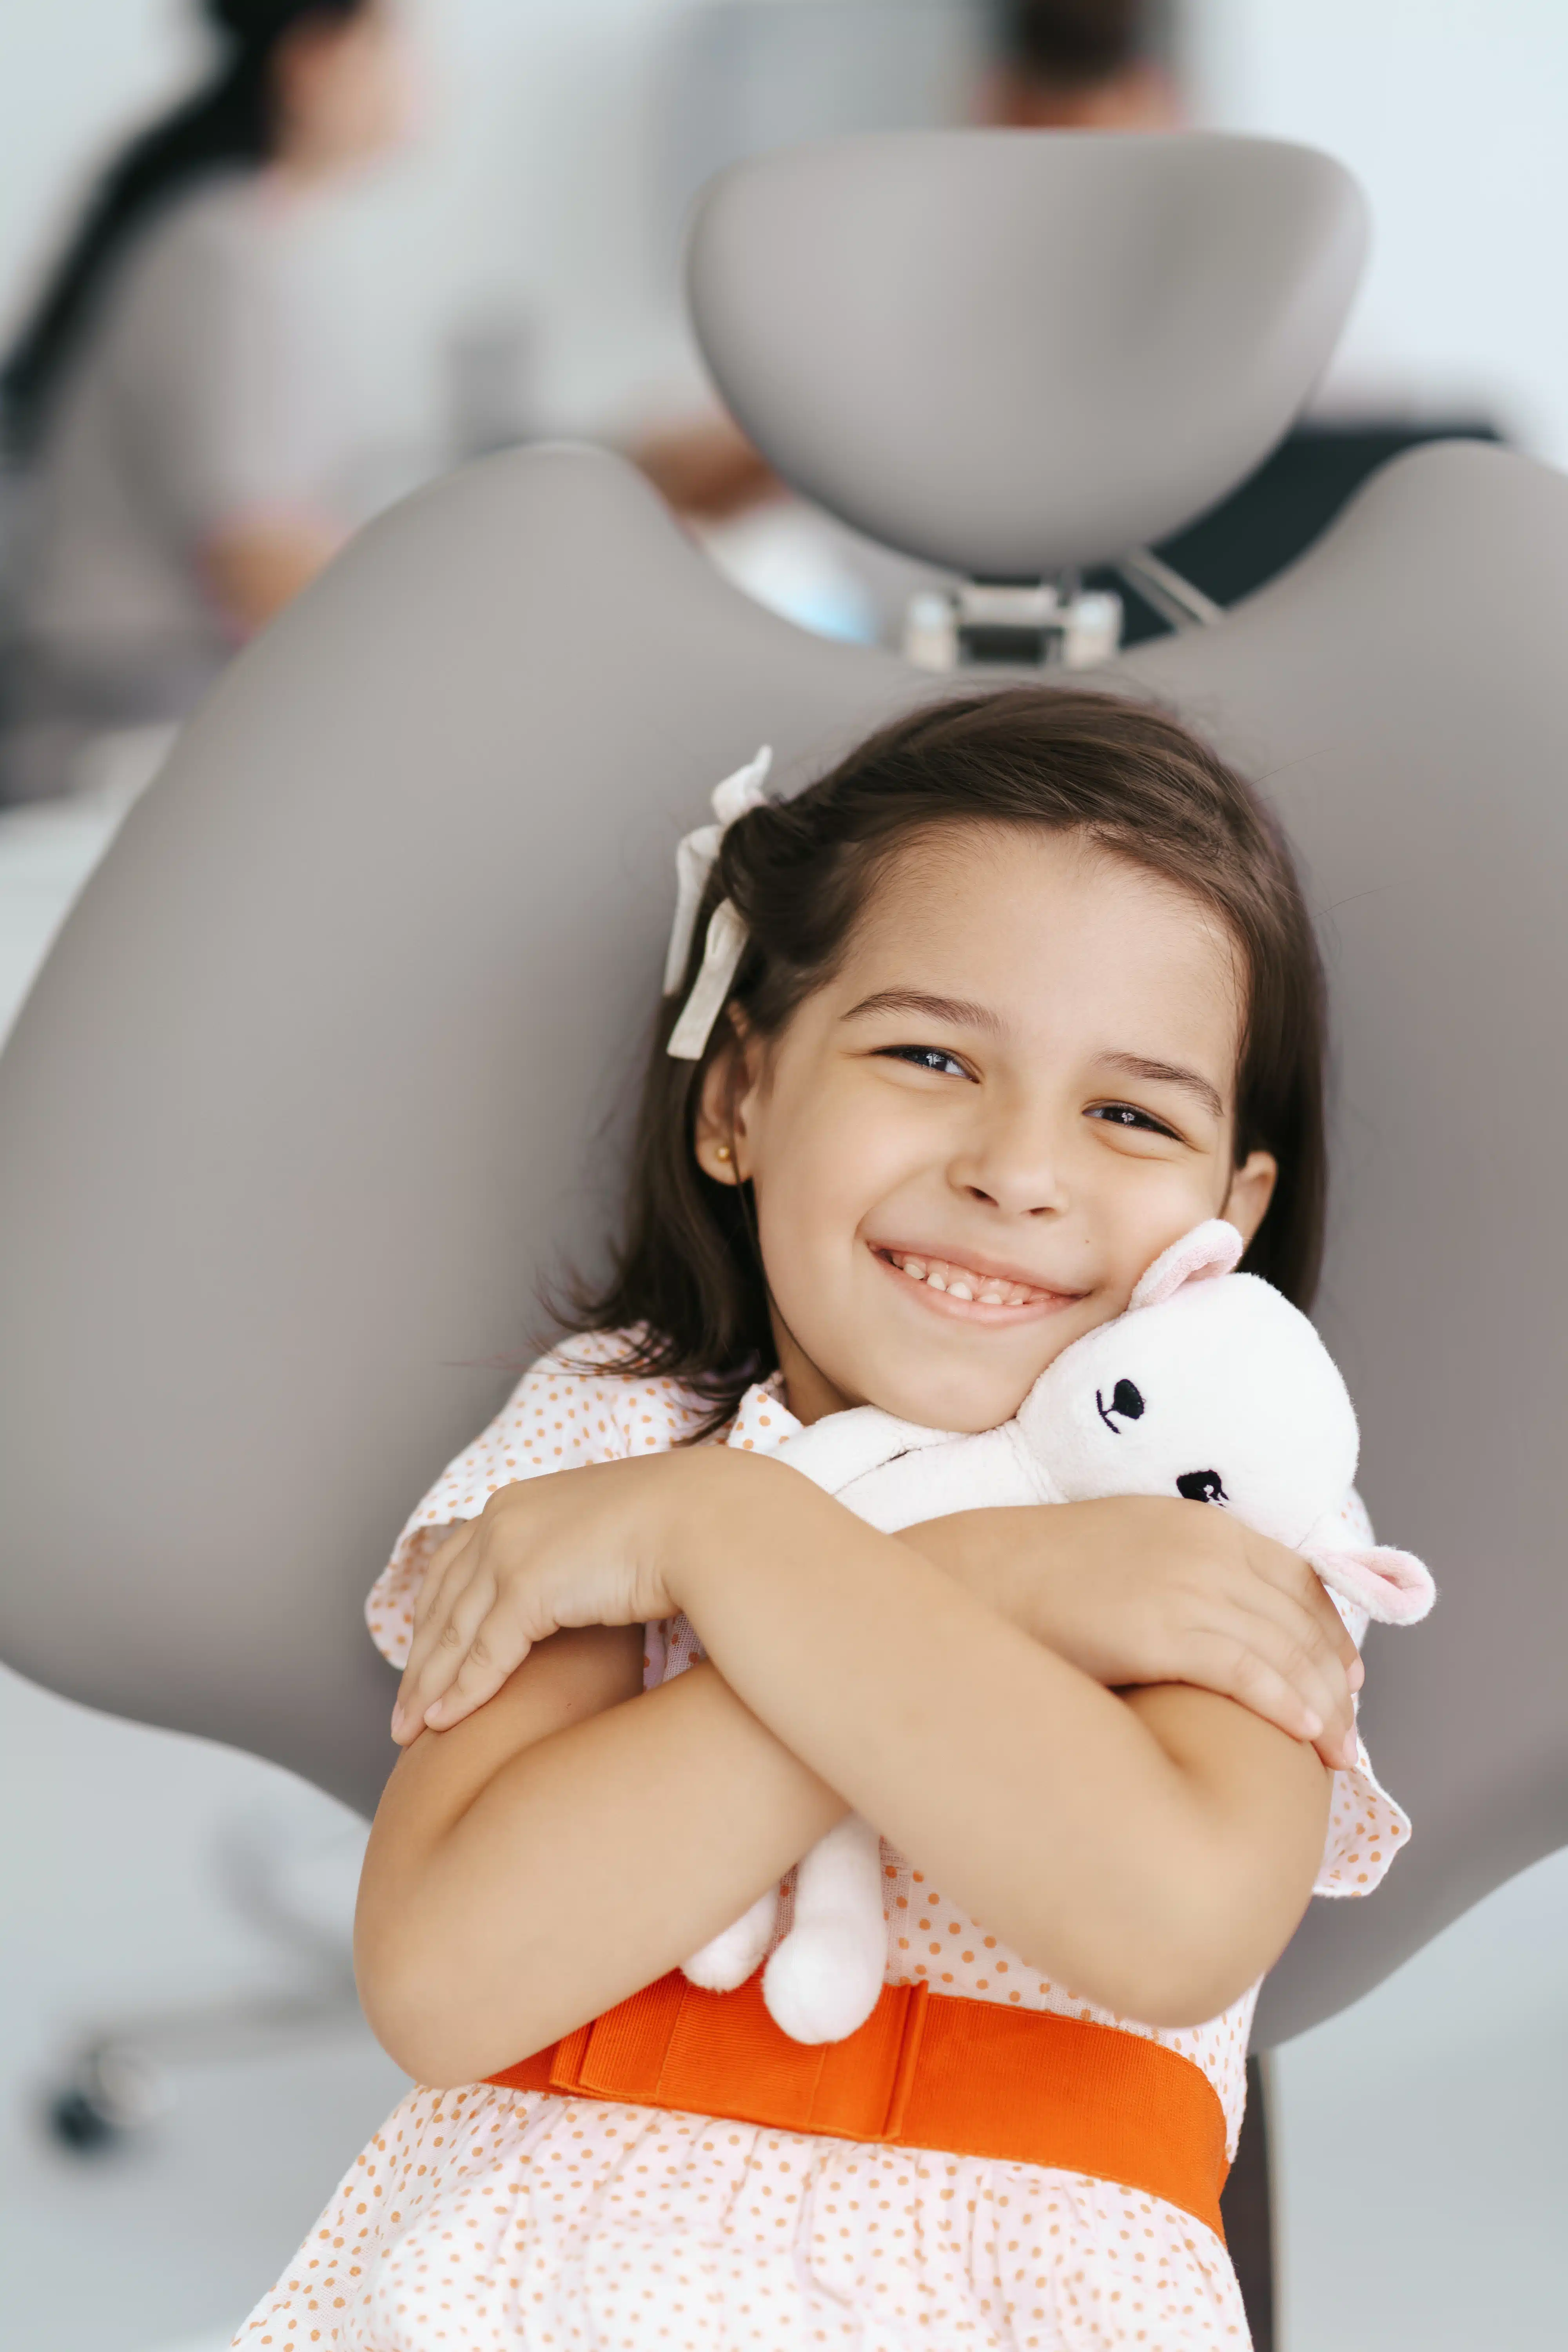 The field of pediatric dentistry is dedicated to the oral health of children from infancy through the teenage years. The goal of the practice is to ensure optimal health from the first tooth.